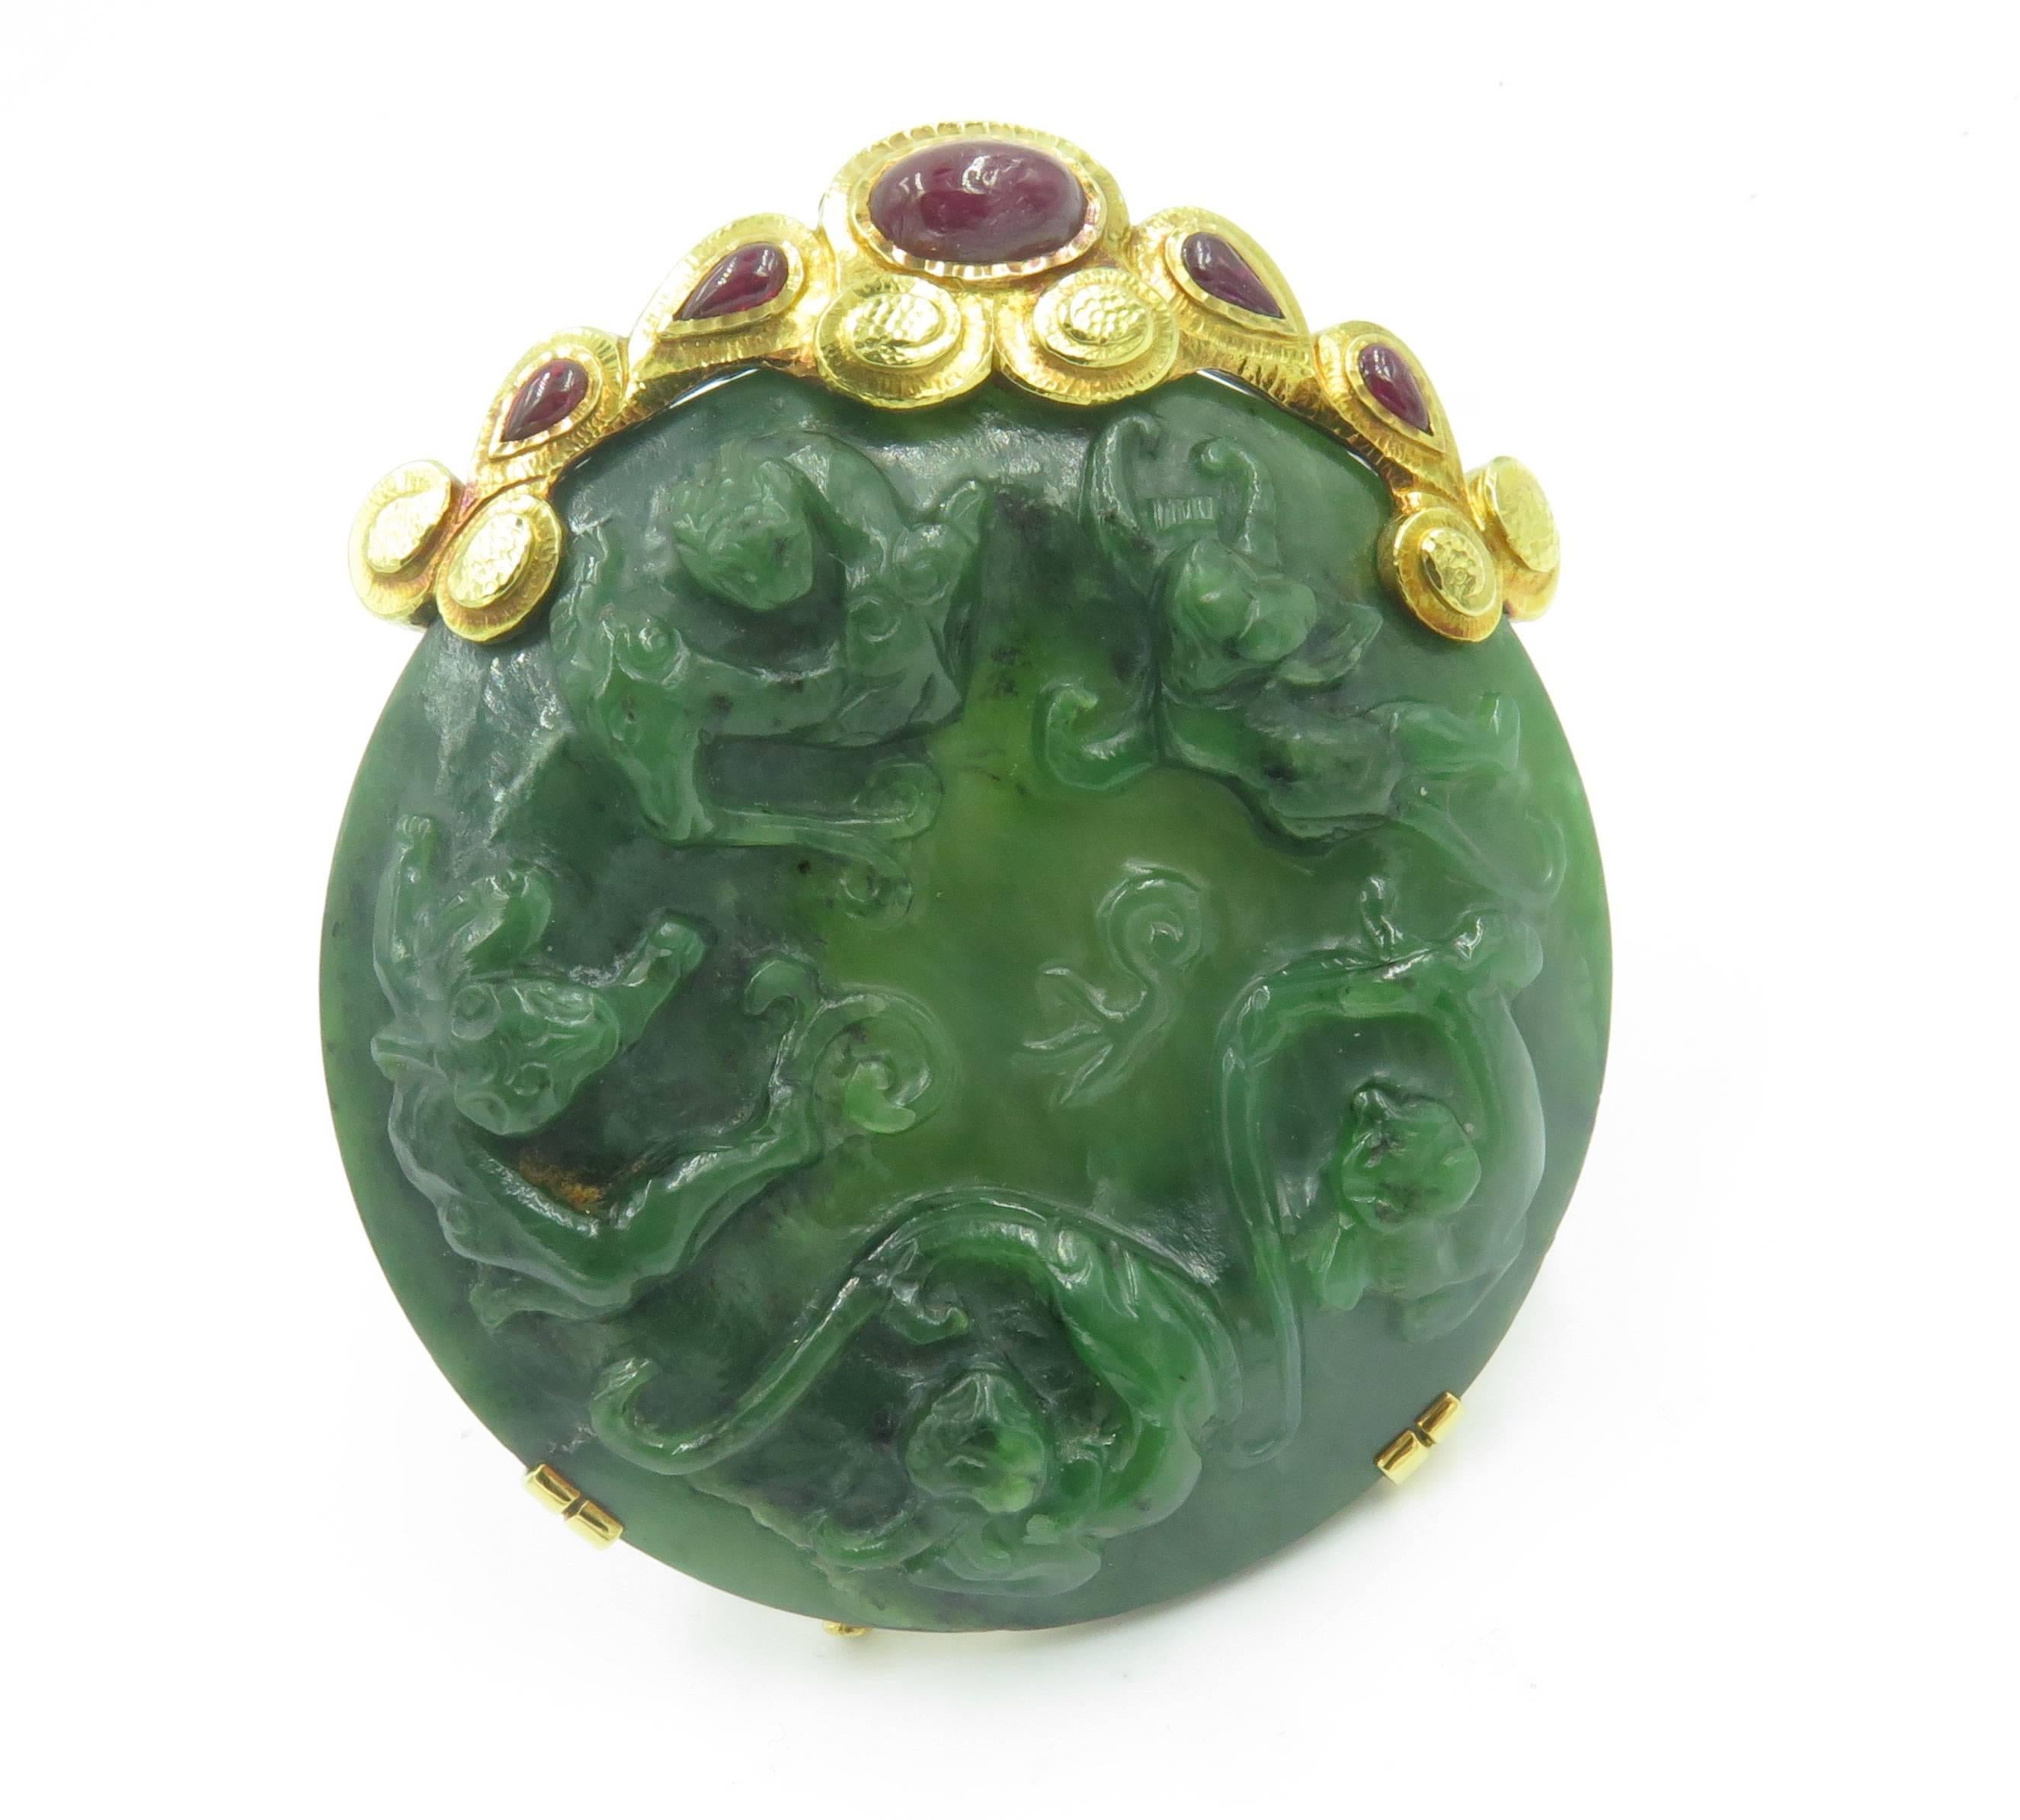 An 18 karat yellow gold, jade and ruby brooch. David Webb. 1971. Designed as a carved jade disc, enhanced at the top with a scrolling hammered gold frame, set with oval and pear shaped ruby cabochons. Brooch measures approximately  3 1/2 inches.